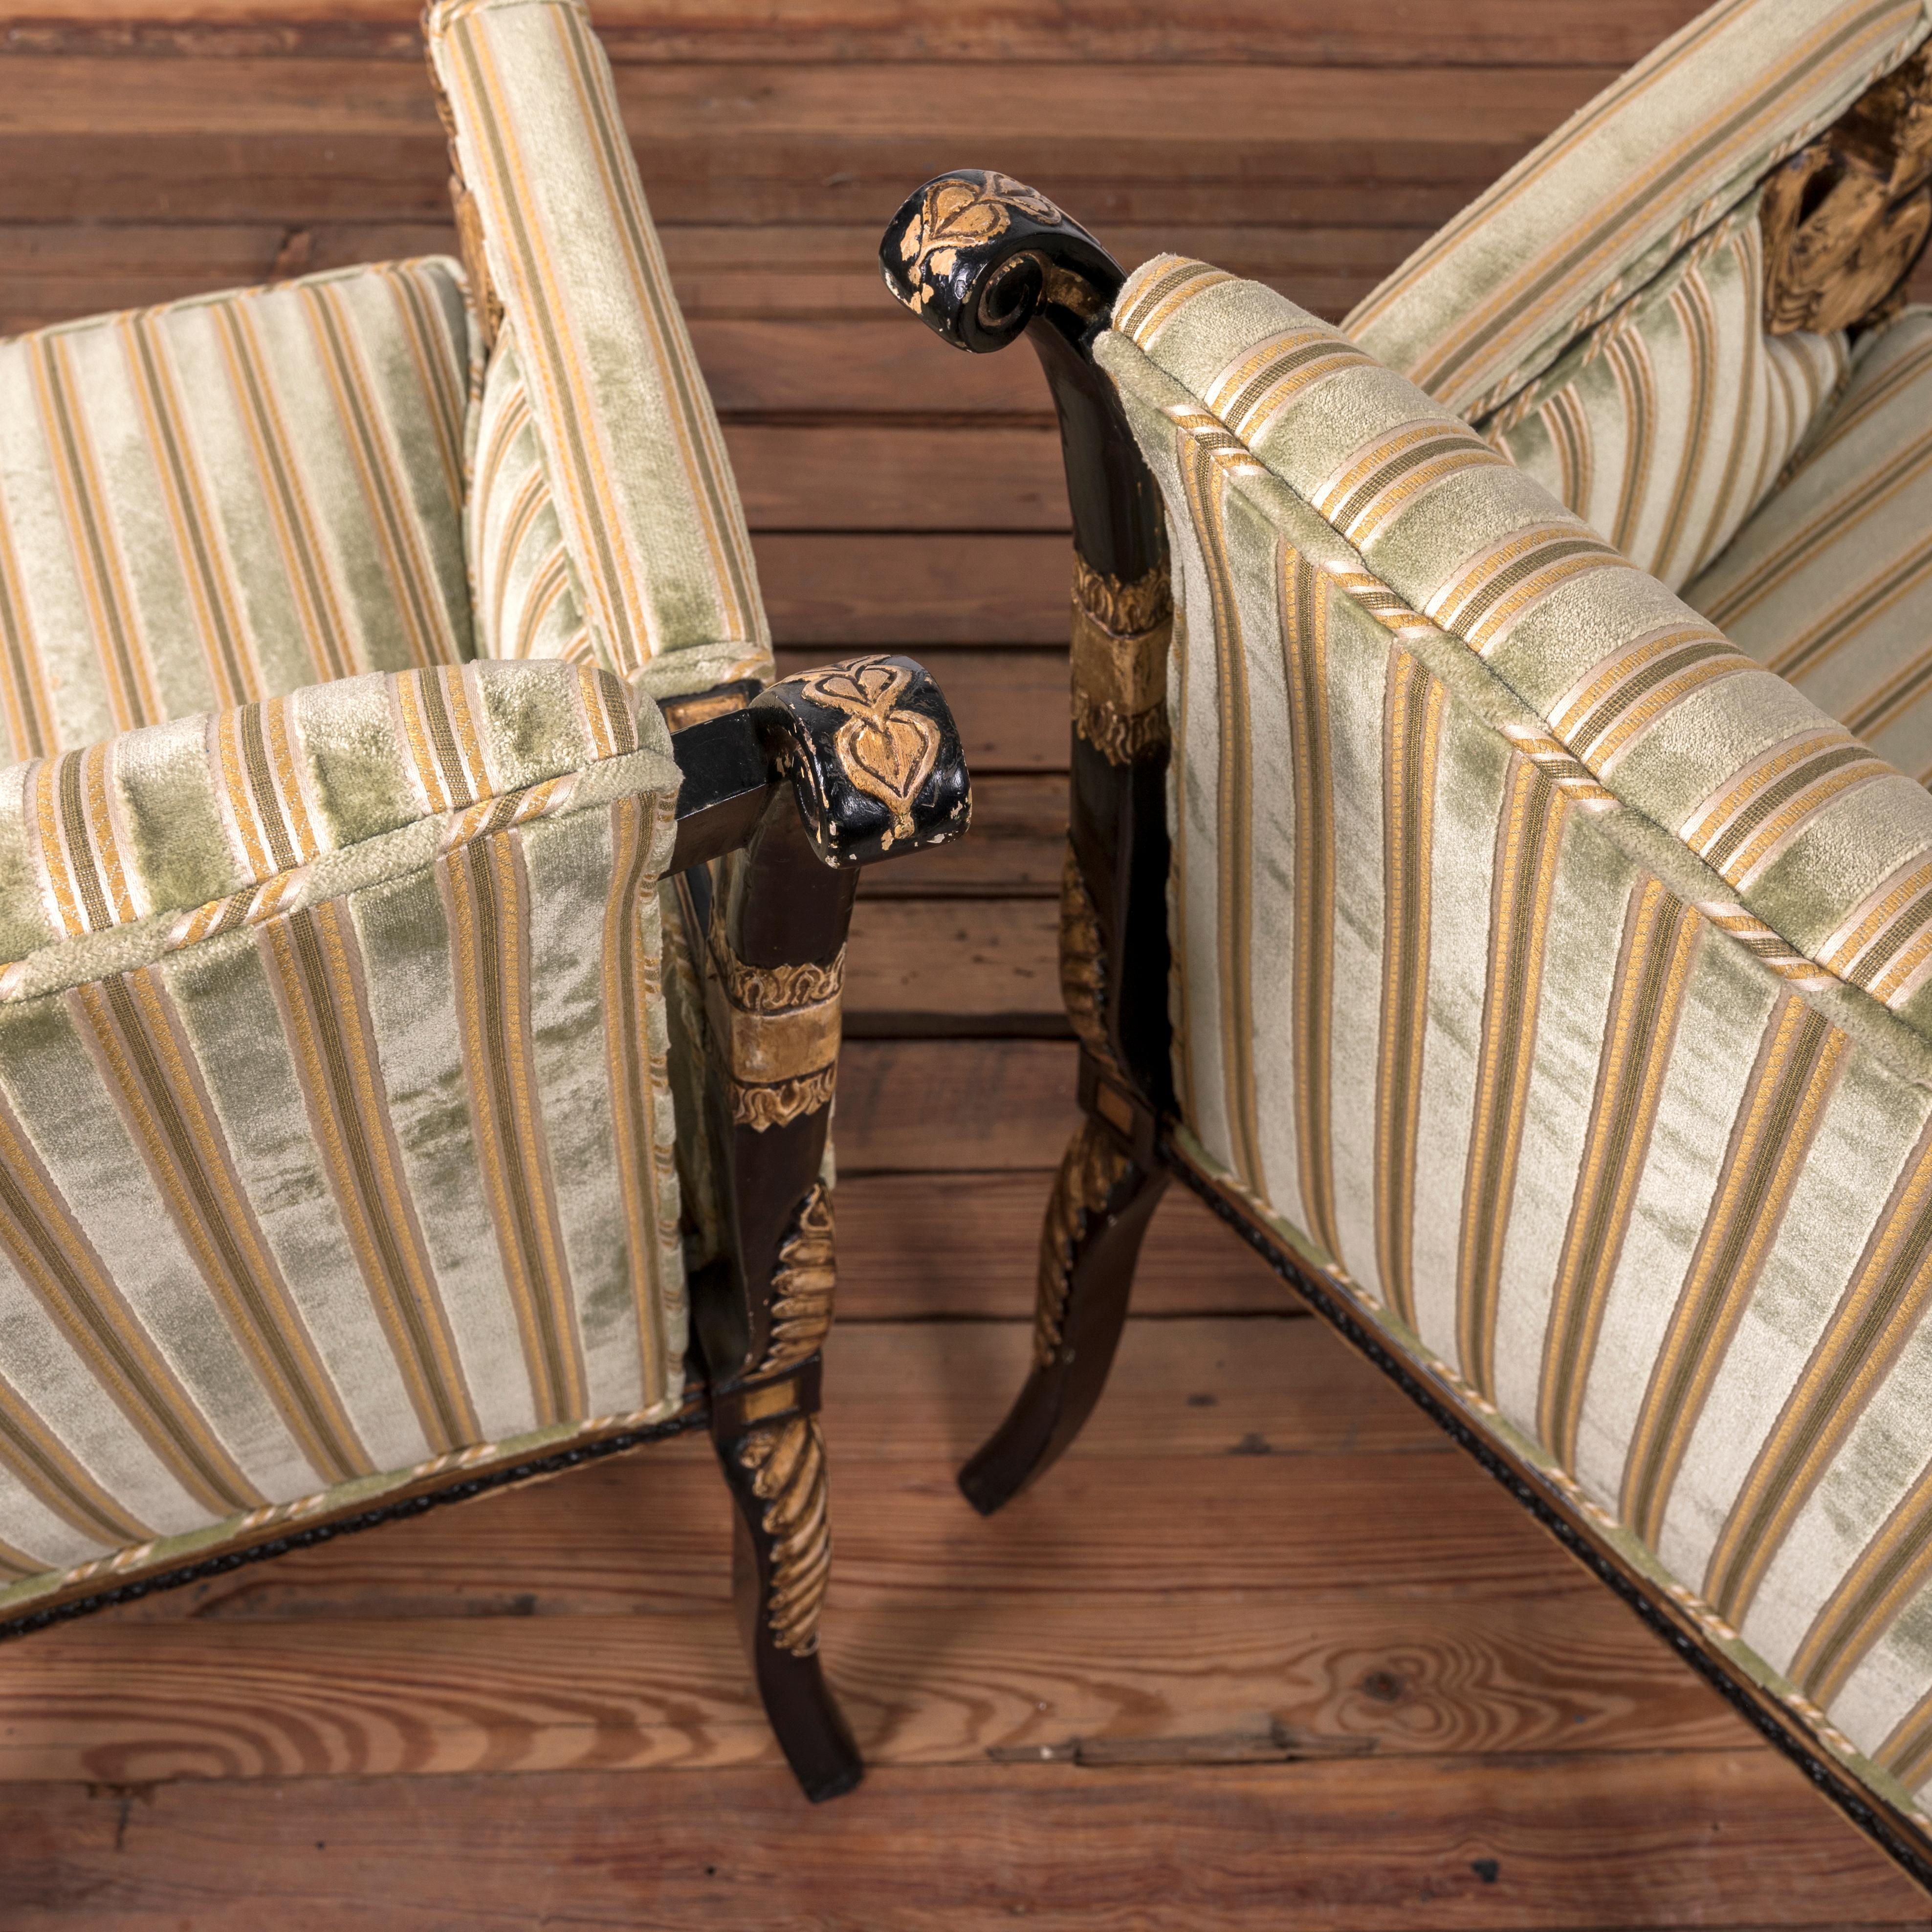 English Regency Style Ebonized and Parcel Gilt Chairs - A Pair For Sale 5